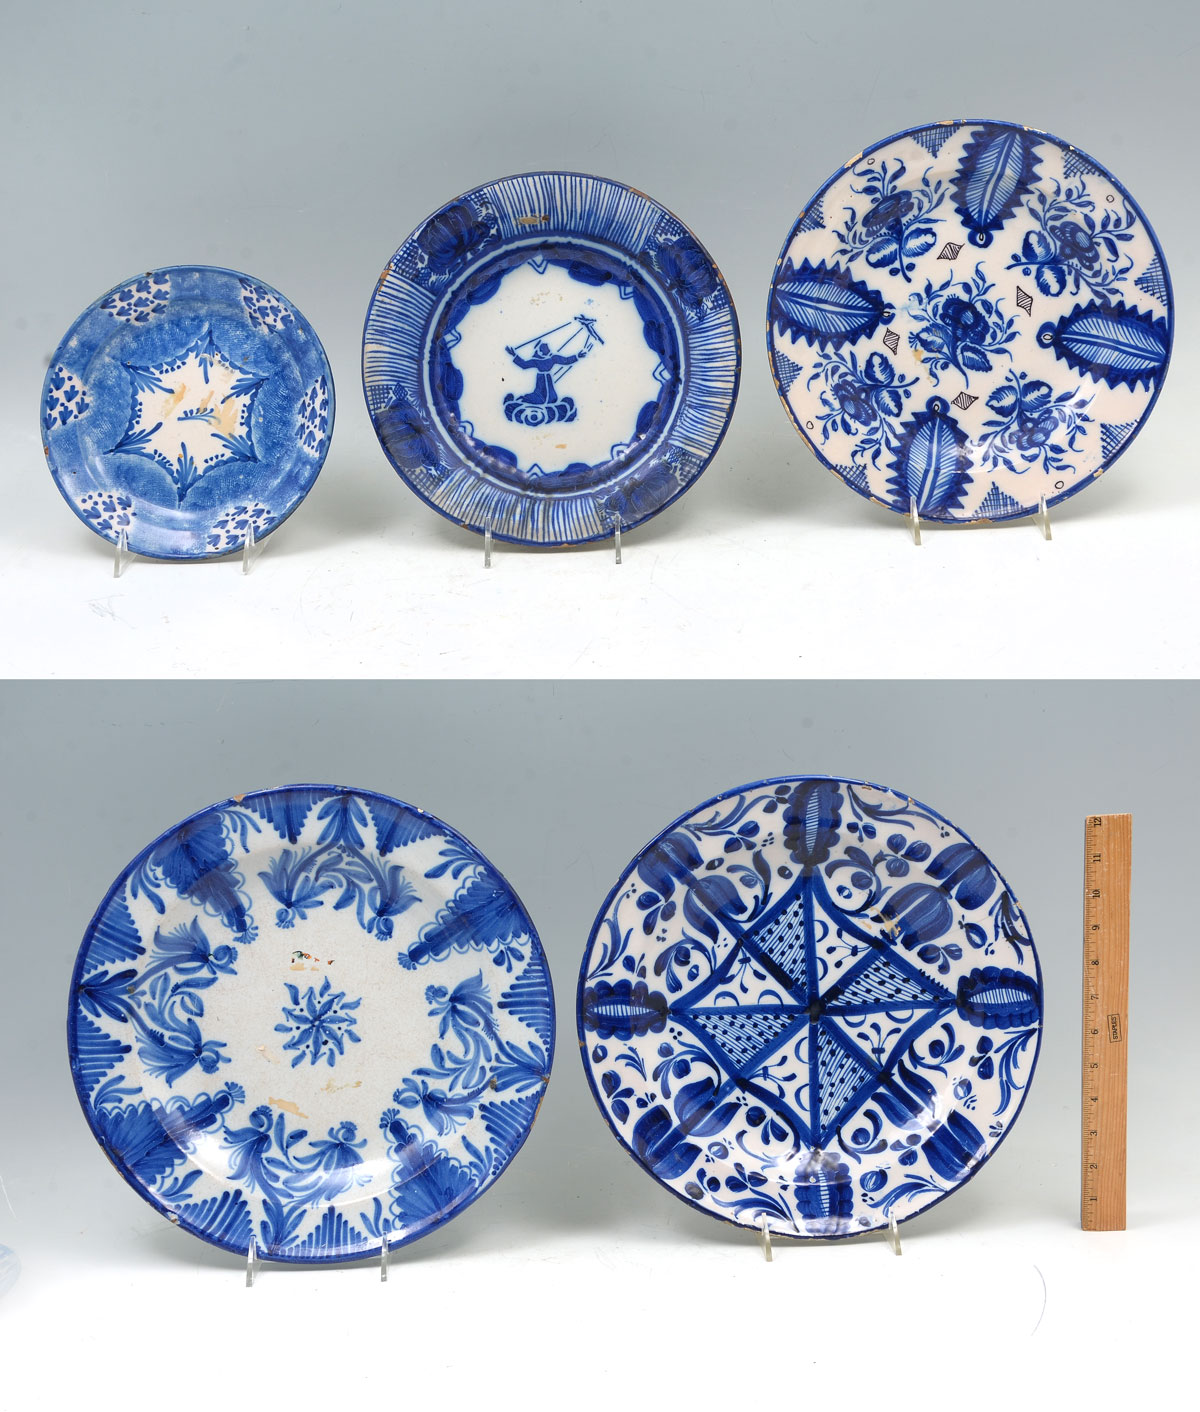 5 EARLY BLUE & WHITE PLATE COLLECTION: